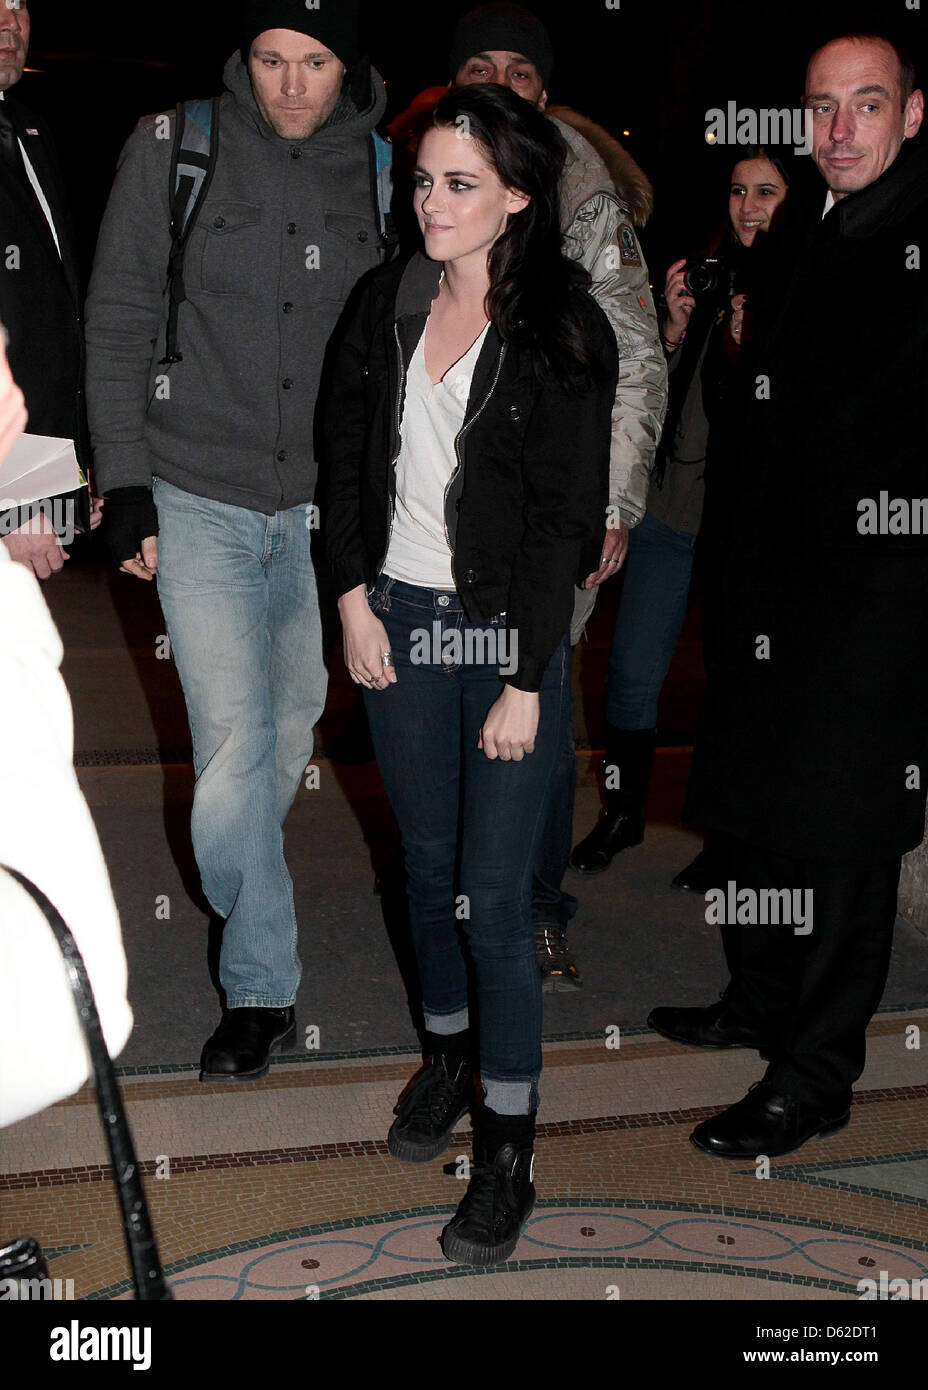 Kristen Stewart returns to her hotel after a photoshoot with Karl Lagerfeld  Paris, France - 30.01.12 Stock Photo - Alamy